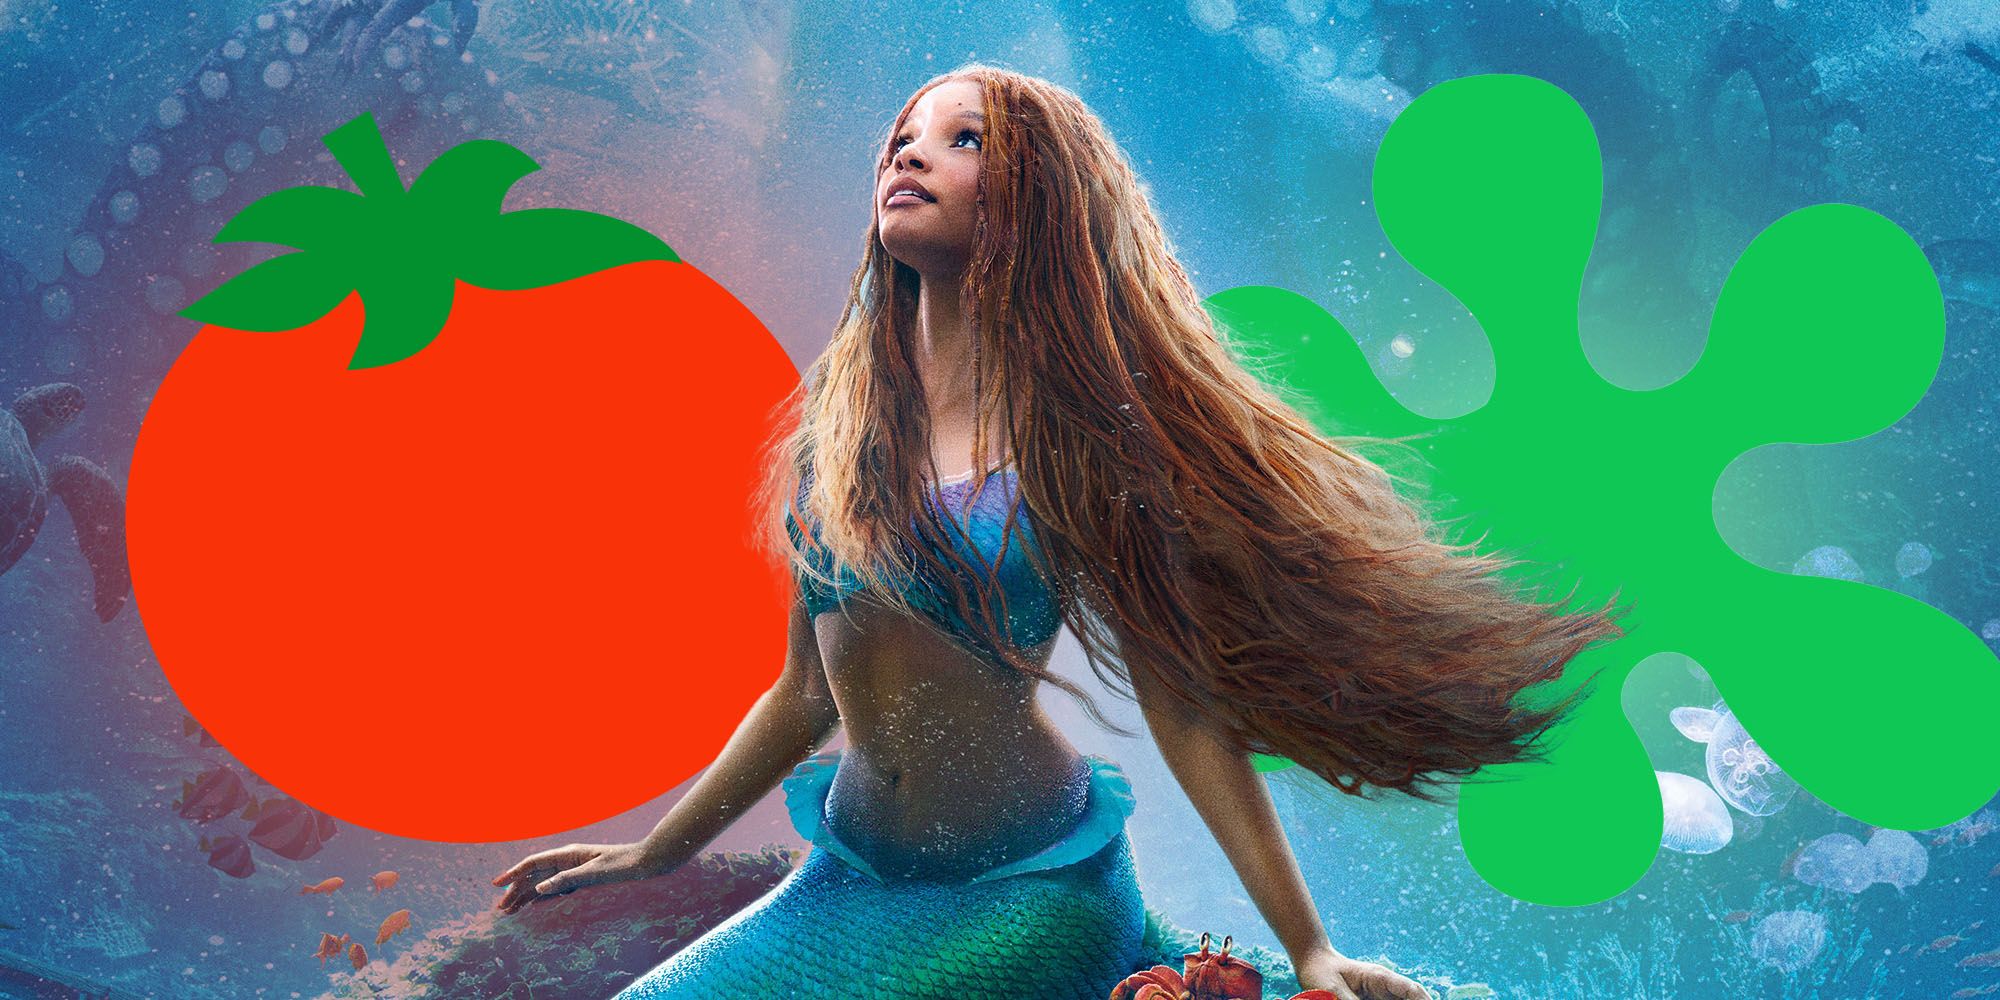 Halle Bailey as Ariel in The Little Mermaid with Rotten Tomatoes emblems